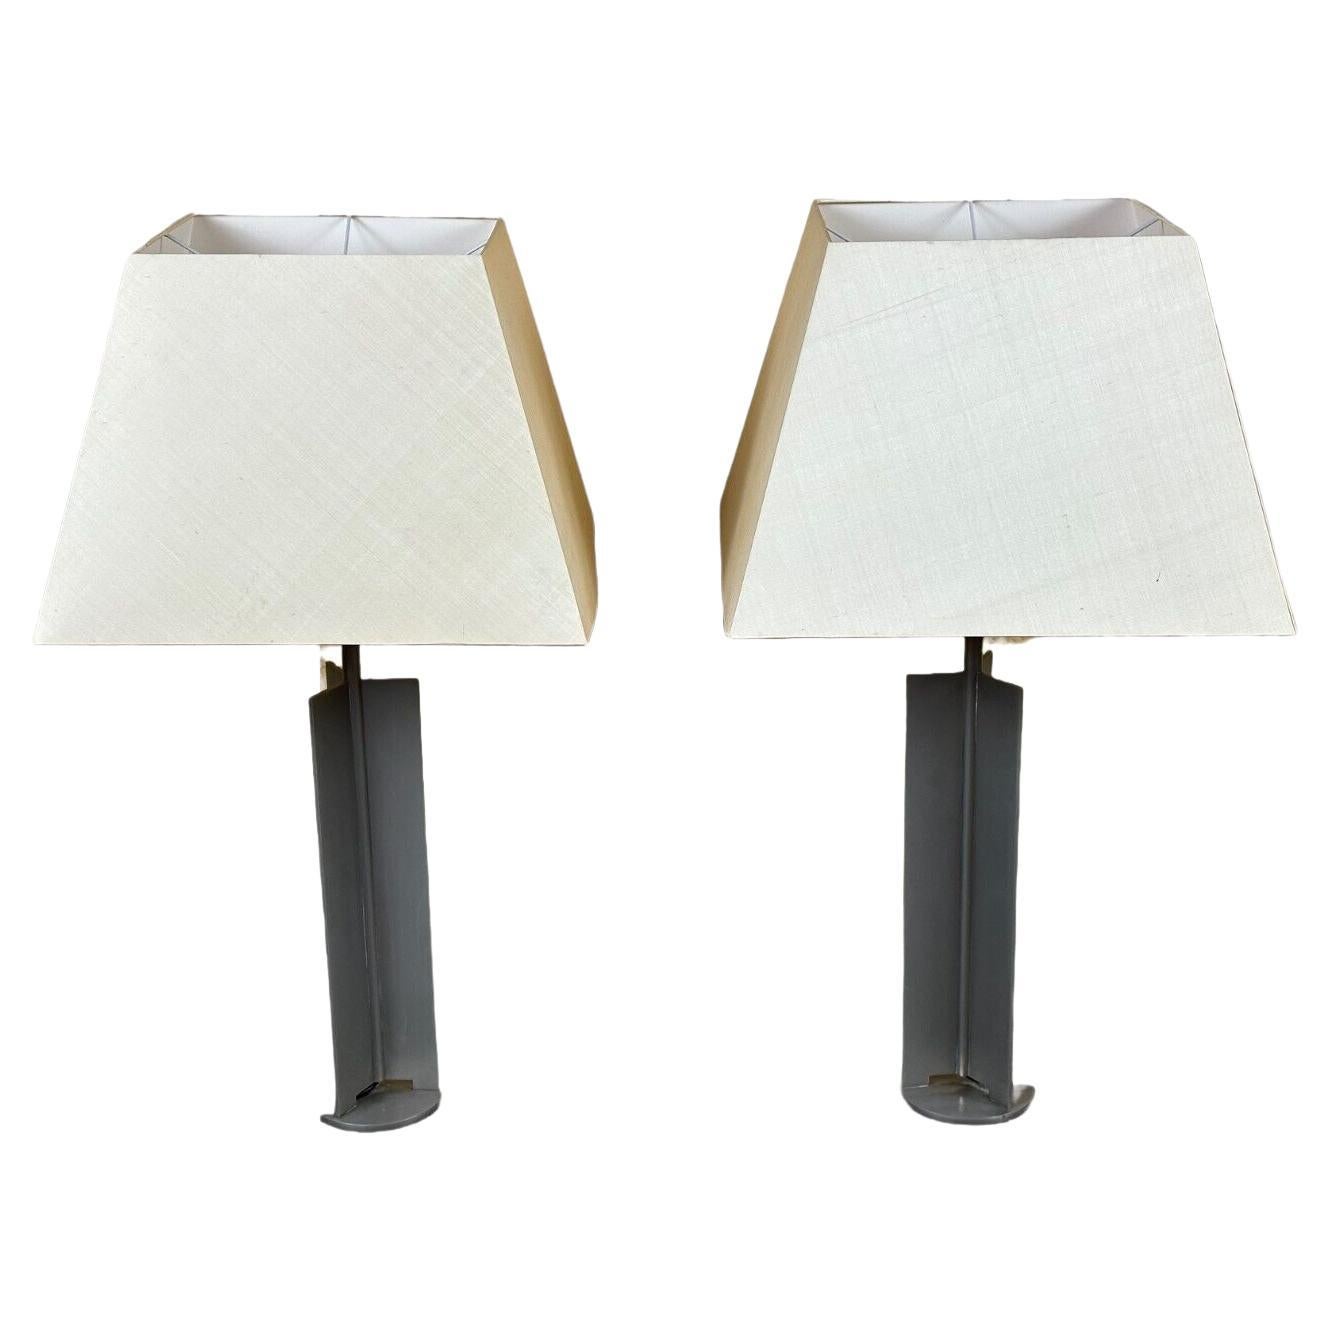 2x 60s 70s XL table lamp table lamp aluminum metal space age design For Sale